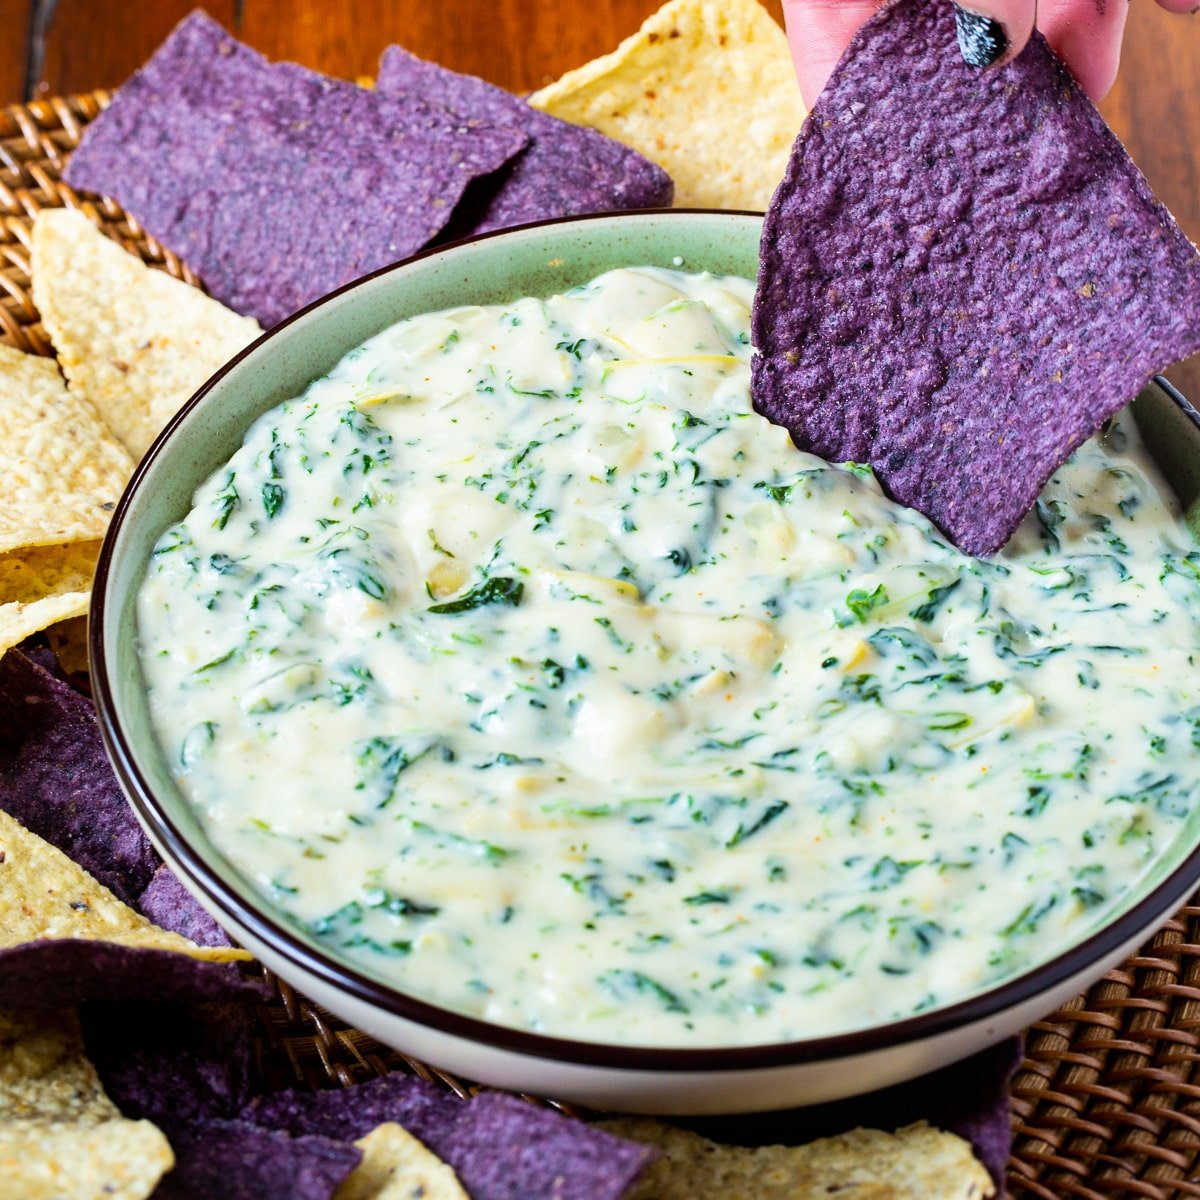 Spinach Artichoke Dip in a bowl with tortilla chips.